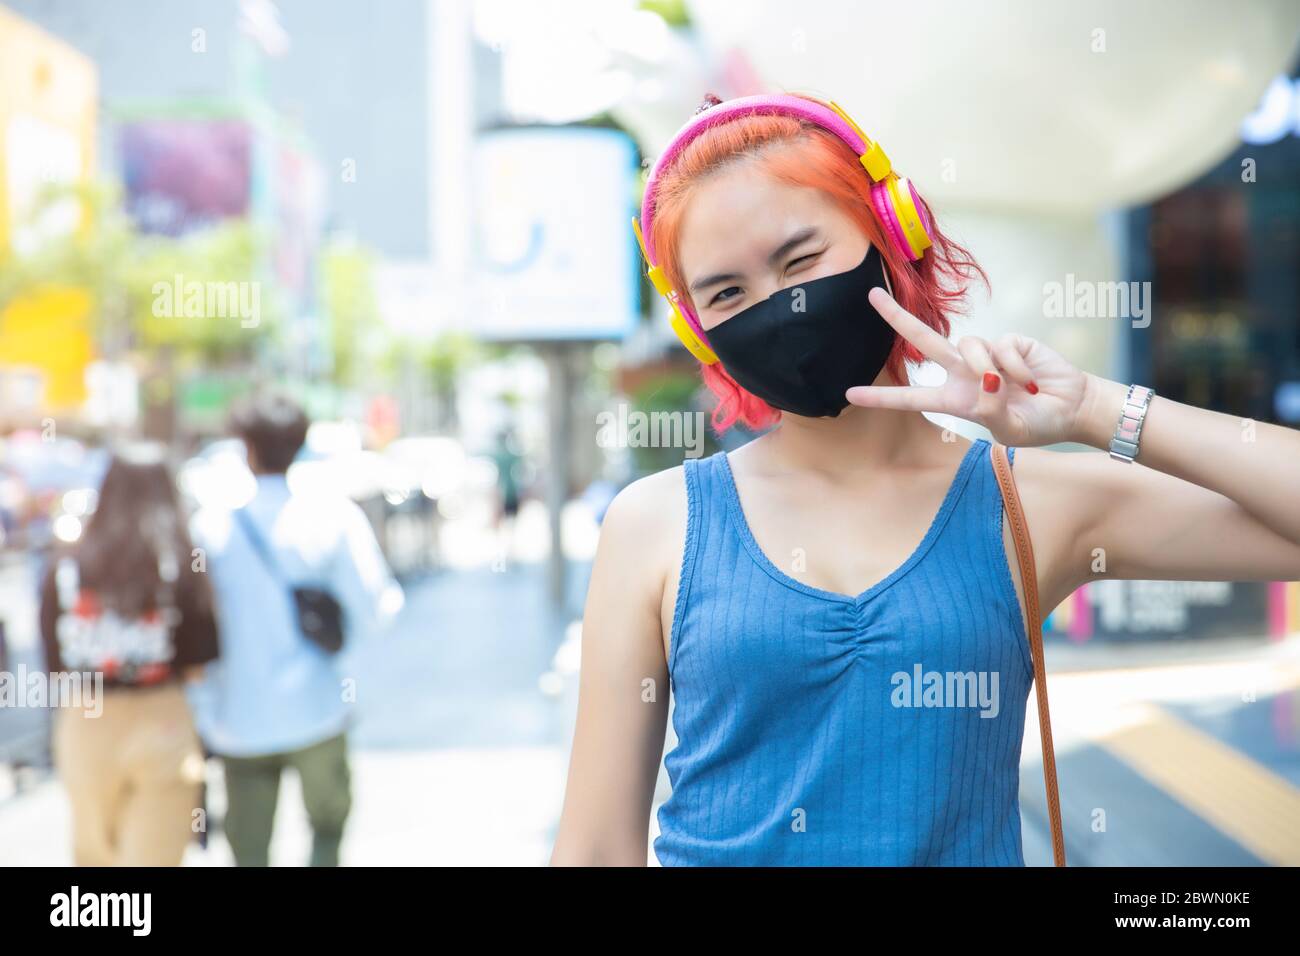 Girl teen cute punk hipster style red hair color wear face mask or face shield at outdoor public shopping walking street. Stock Photo